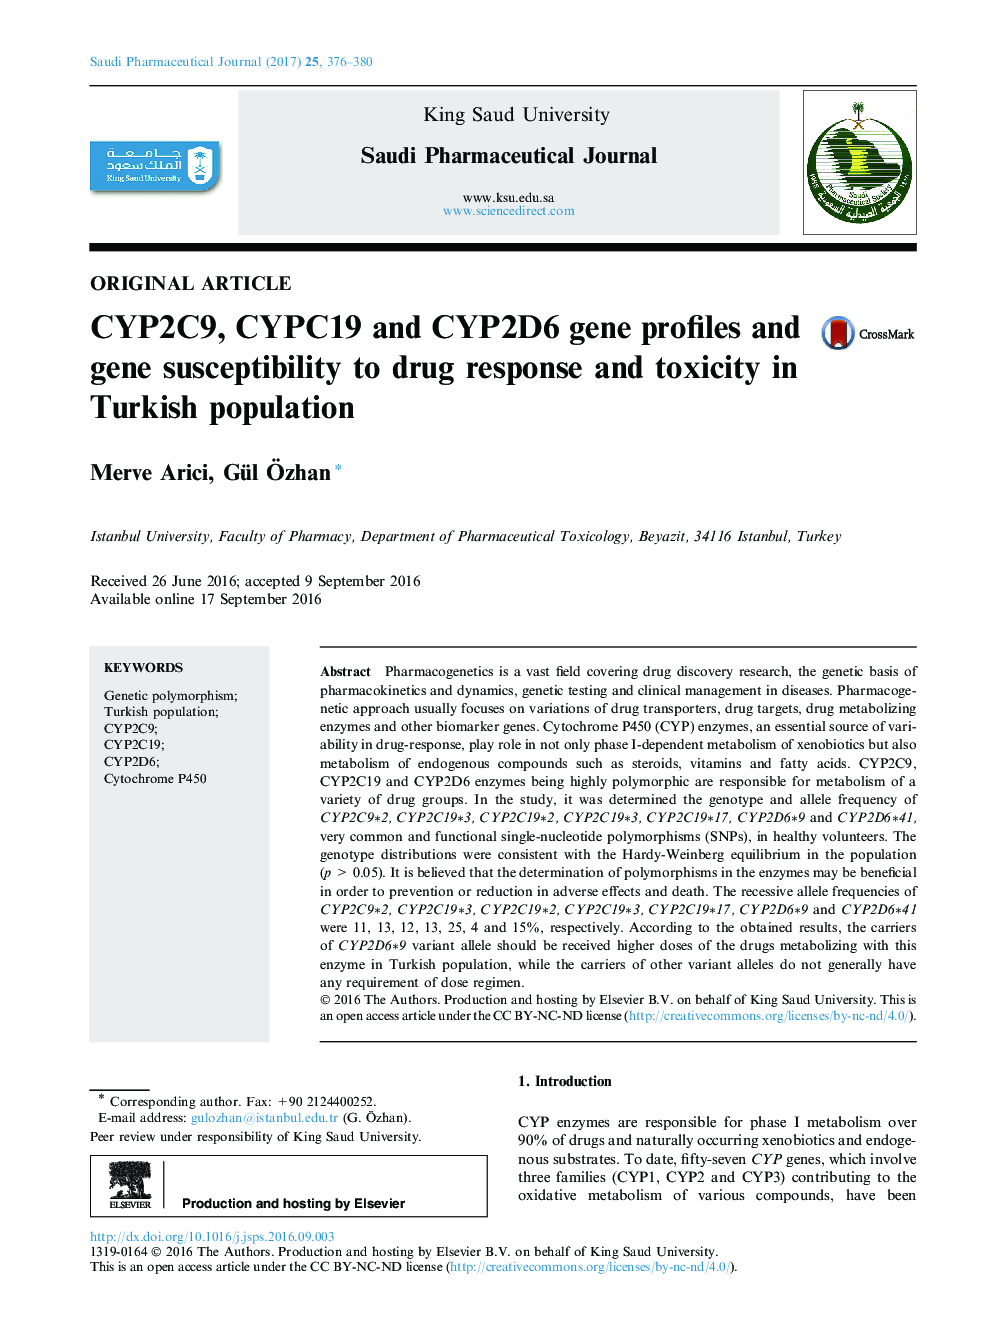 CYP2C9, CYPC19 and CYP2D6 gene profiles and gene susceptibility to drug response and toxicity in Turkish population